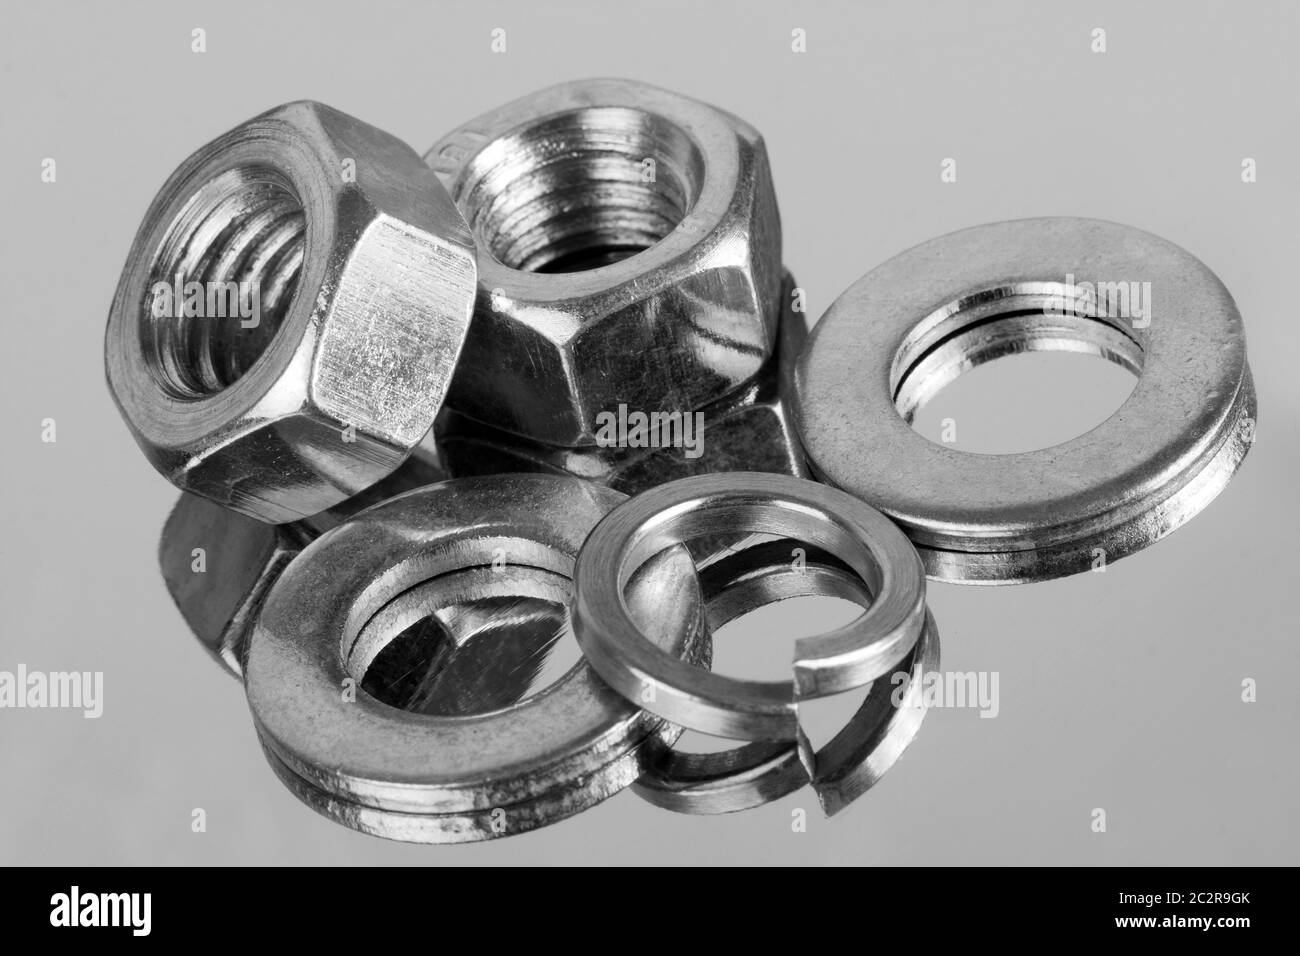 Small industrial equipment - nuts and washers. Close-up Stock Photo